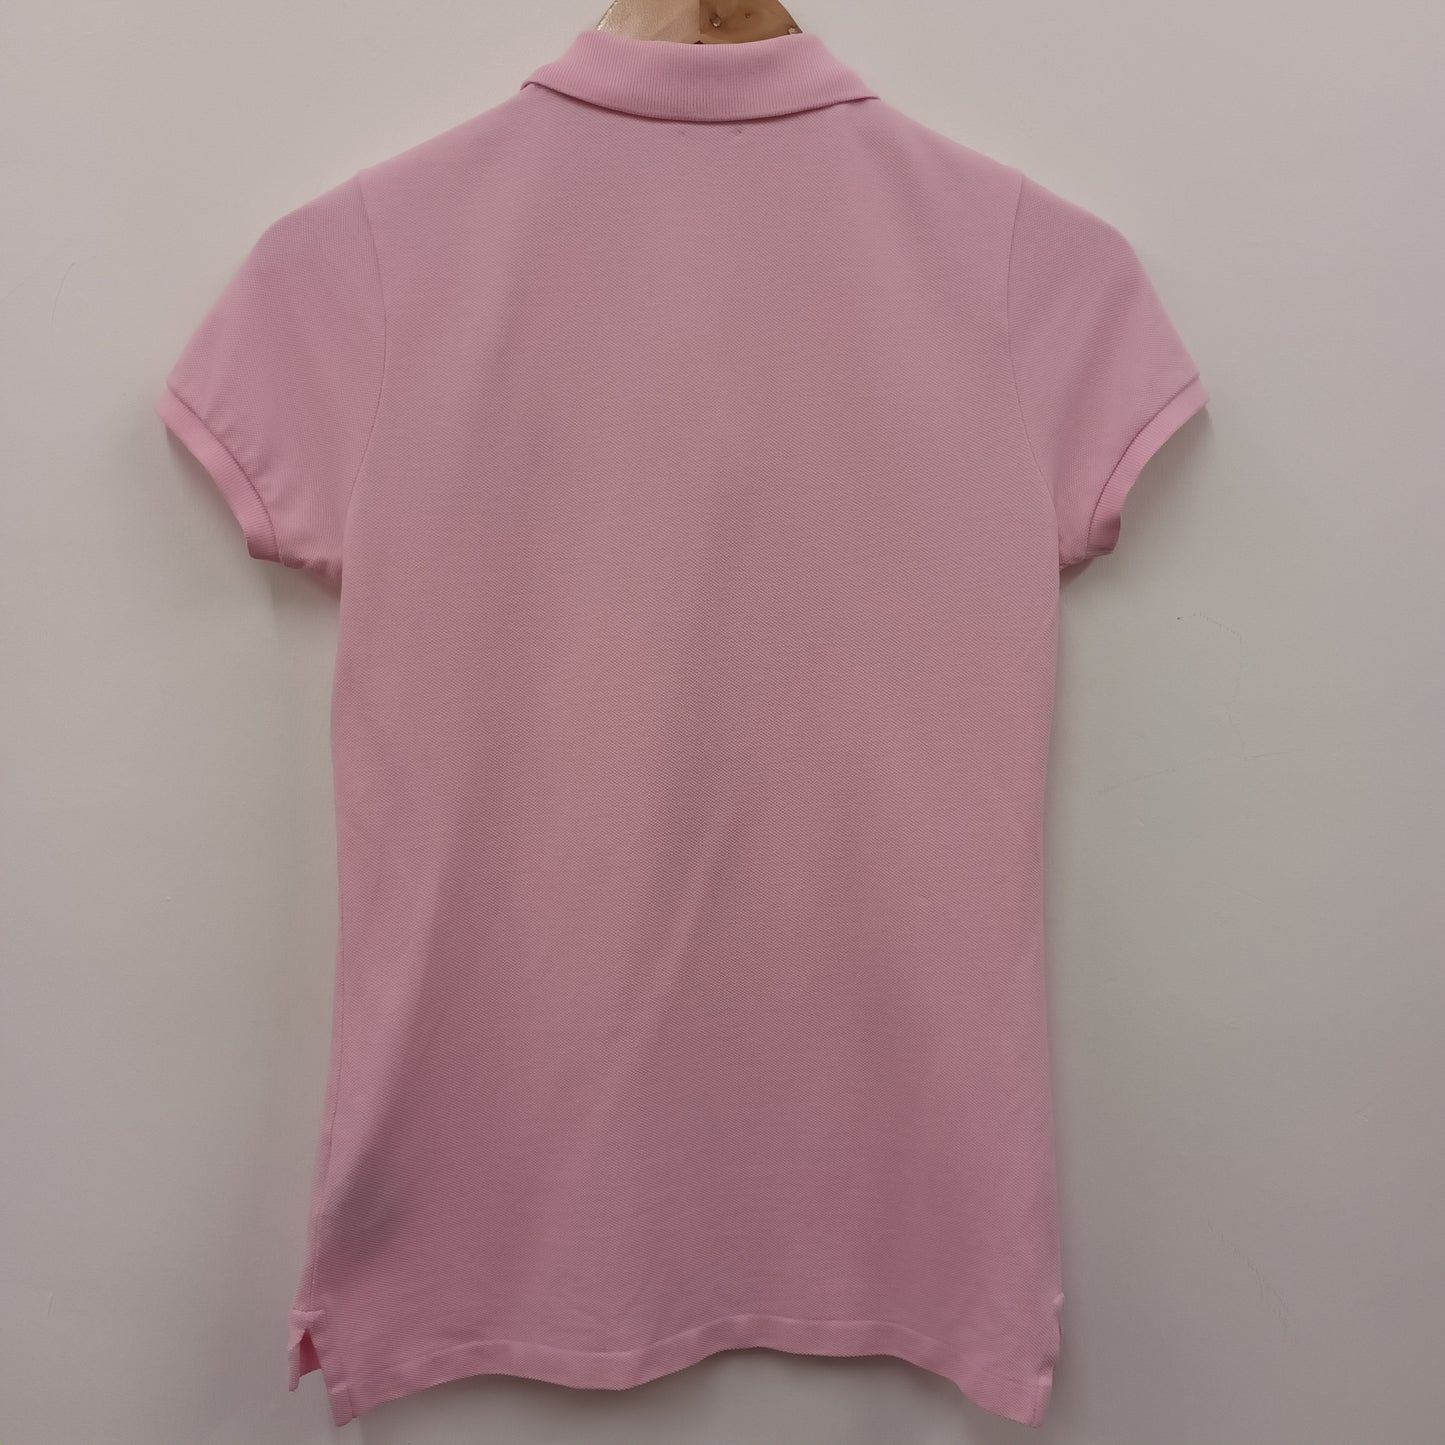 Polo Ralph Lauren Small The Skinny Polo Pink Short Sleeve Shirt